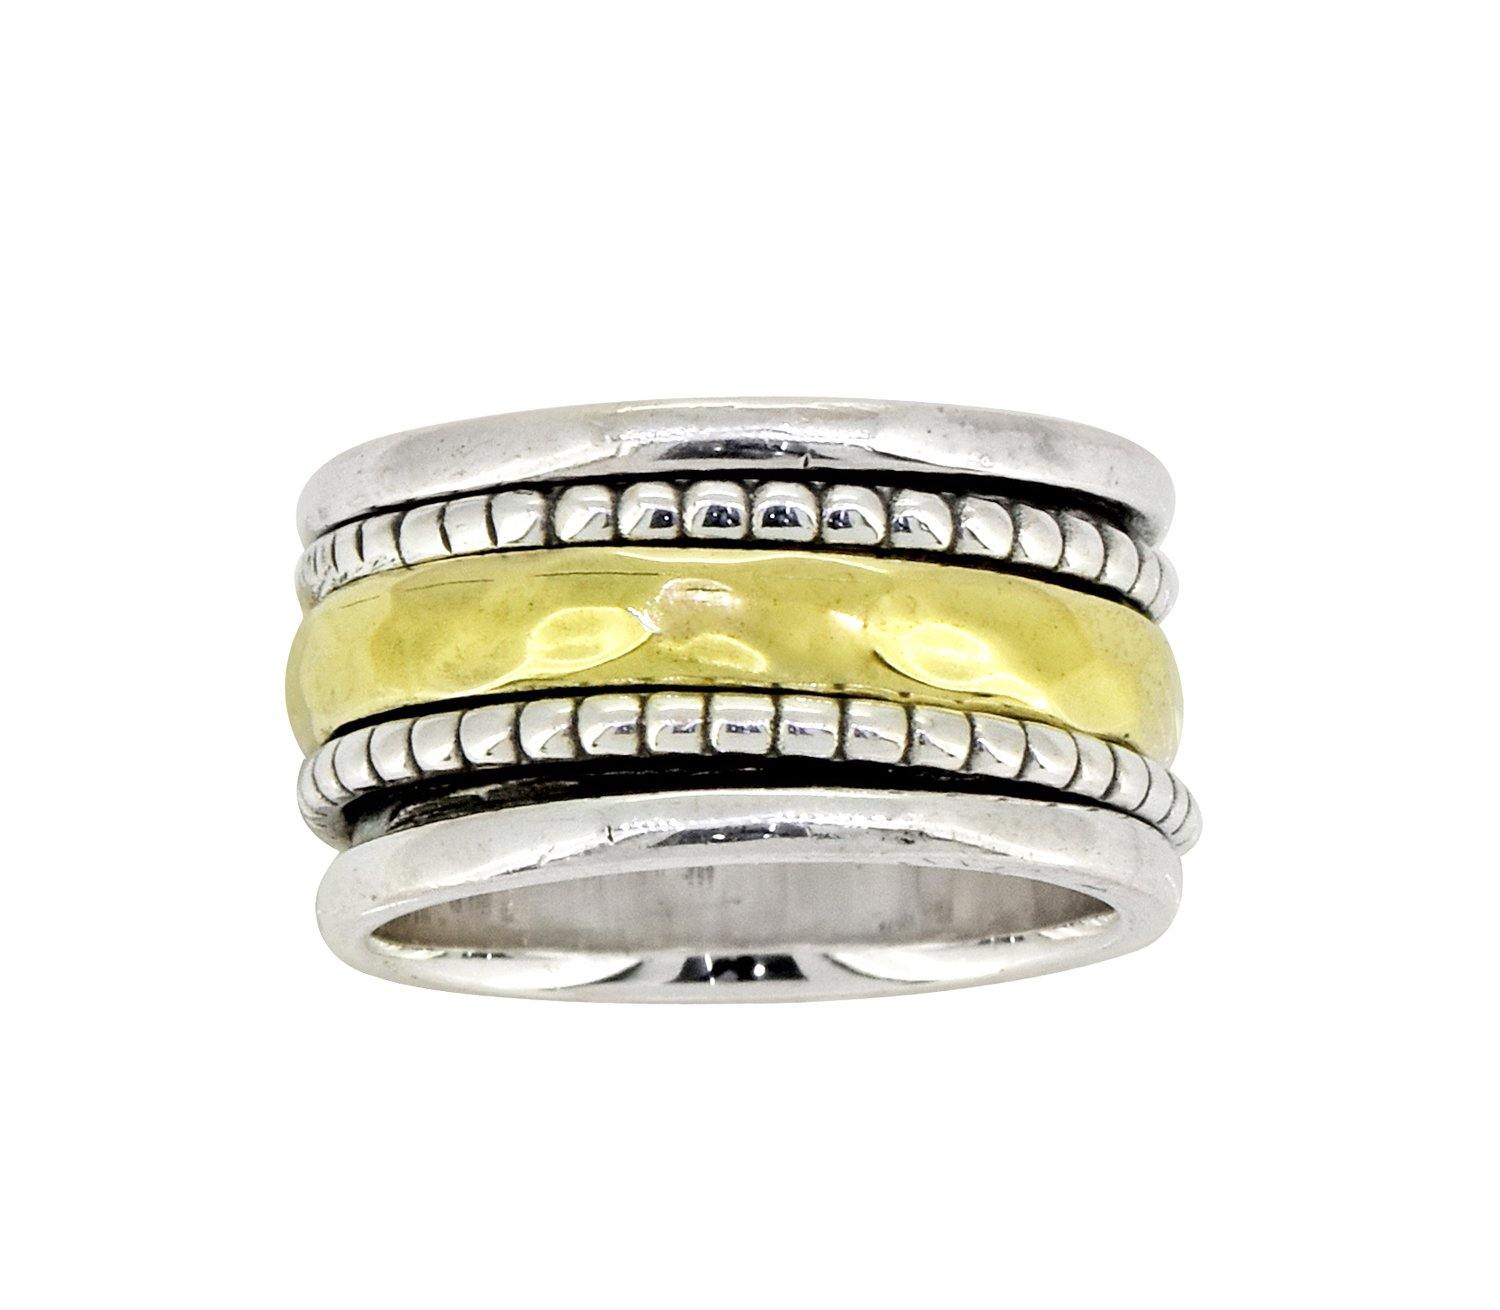 Solid 925 Sterling Silver Brass Meditation Spinning Ring Jewelry - YoTreasure